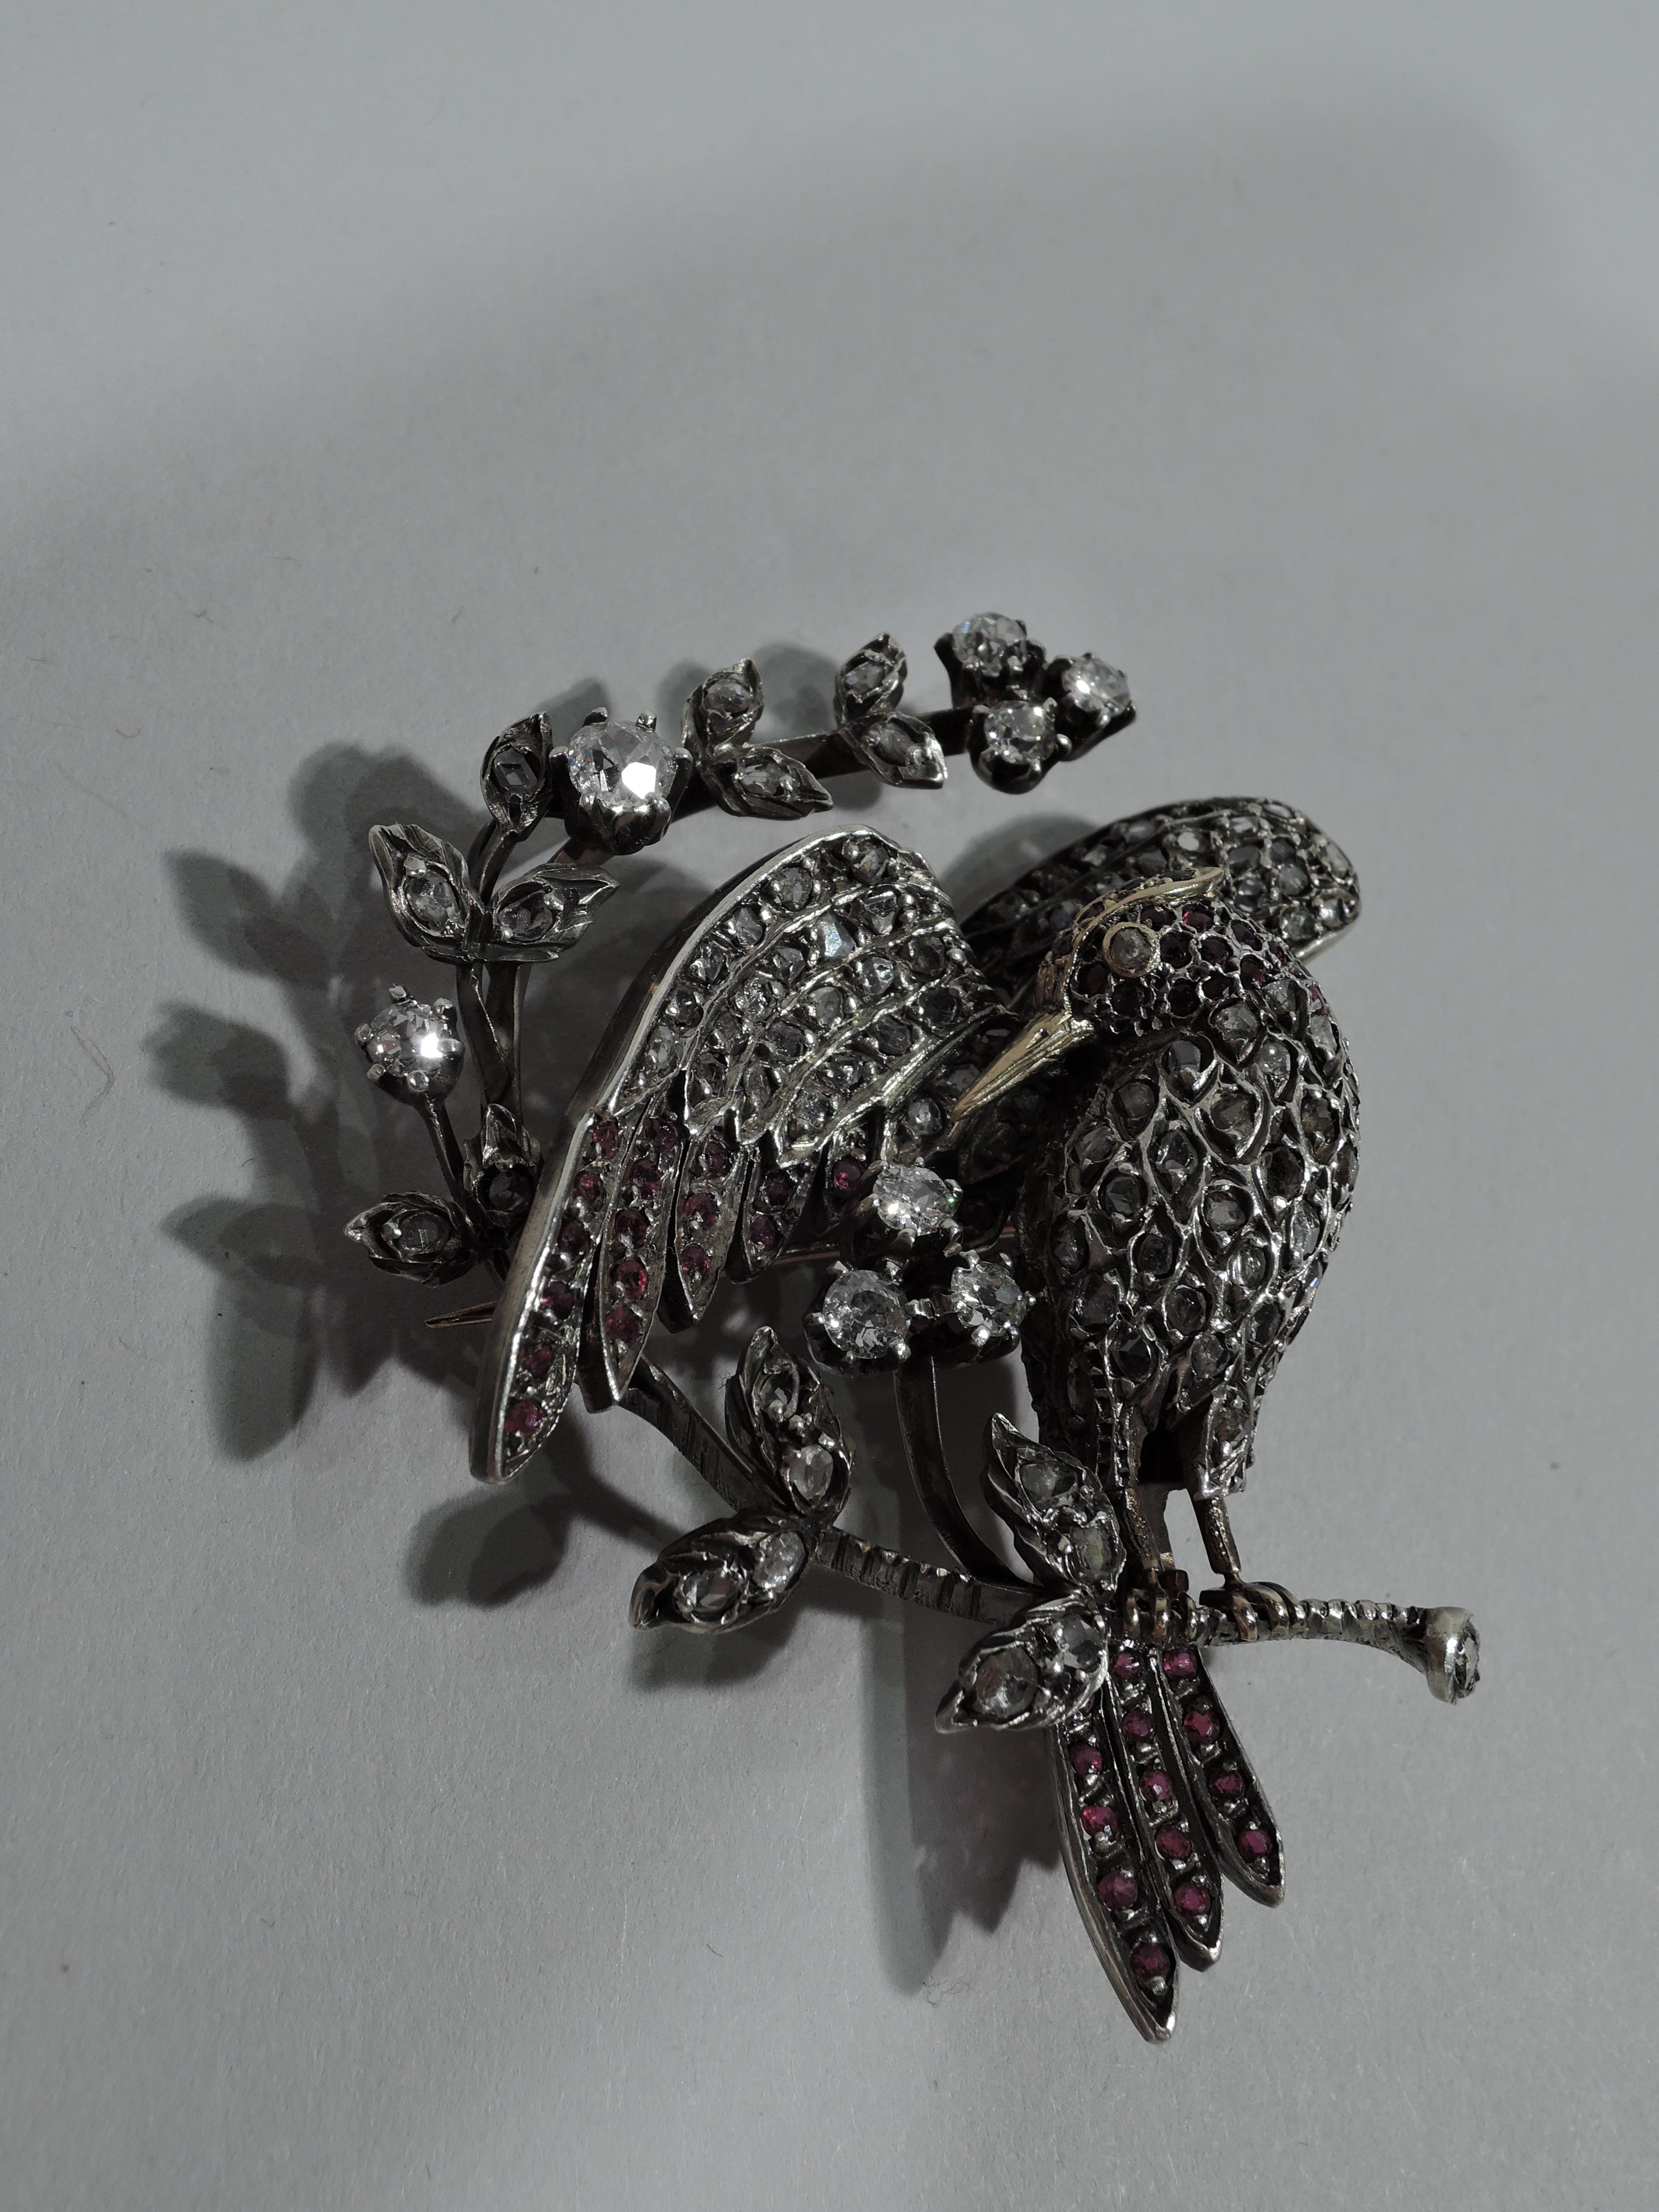 Charming figural silver brooch in form of bird. The bird is covered with inlaid rose-cut diamonds and faceted rubies on head, tail, and wing tips. Beak is gold as is ruby-encrusted crown – exquisite touches. The bird is perched on c-scroll branch